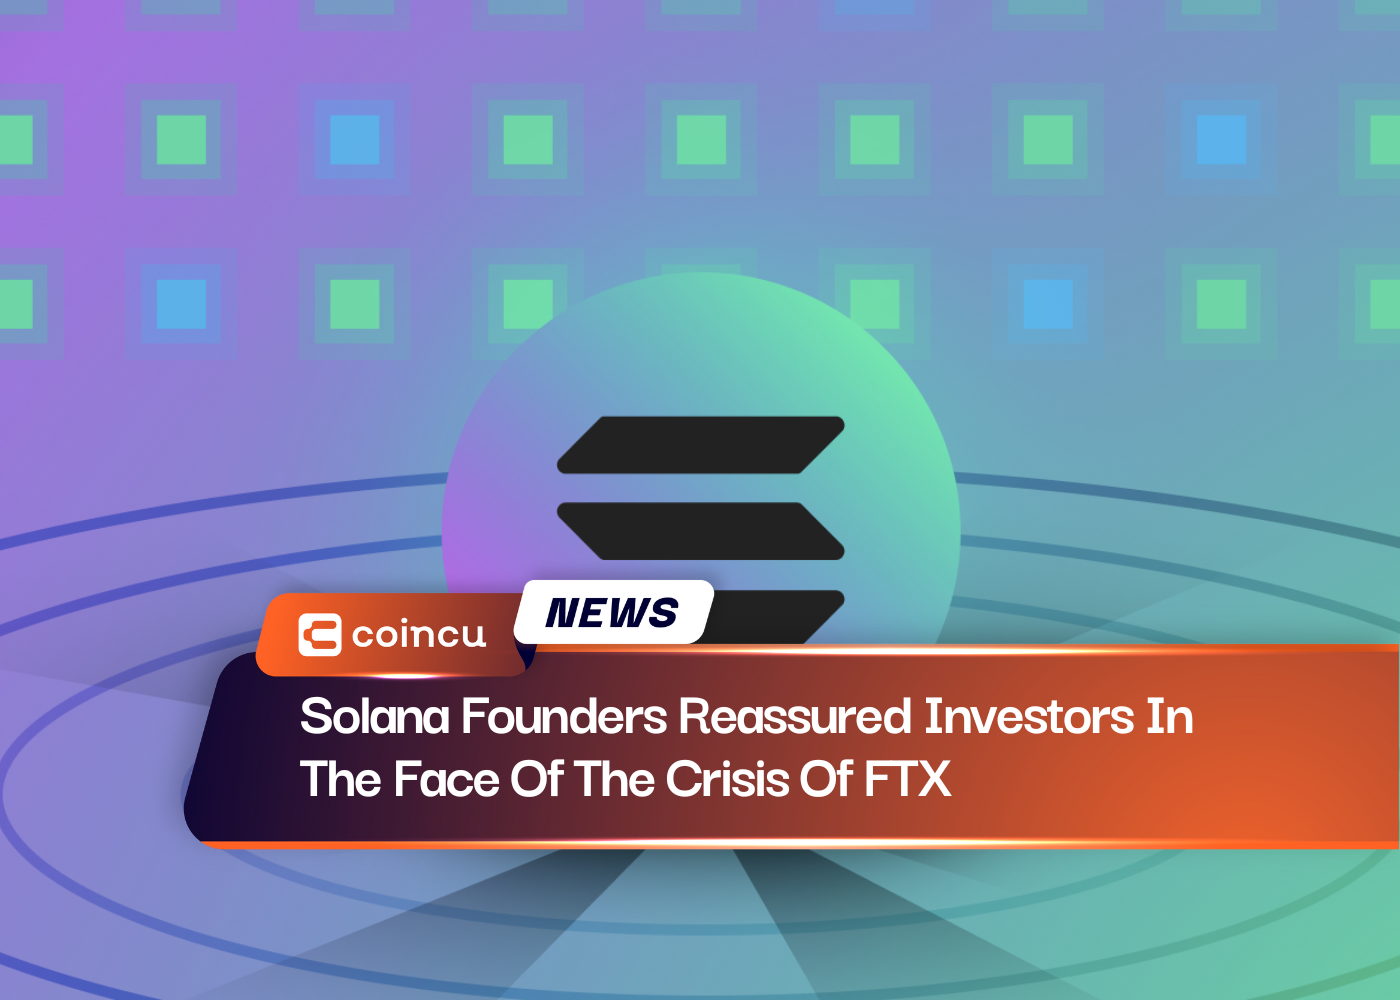 Solana Founders Reassured Investors In The Face Of The Crisis Of FTX